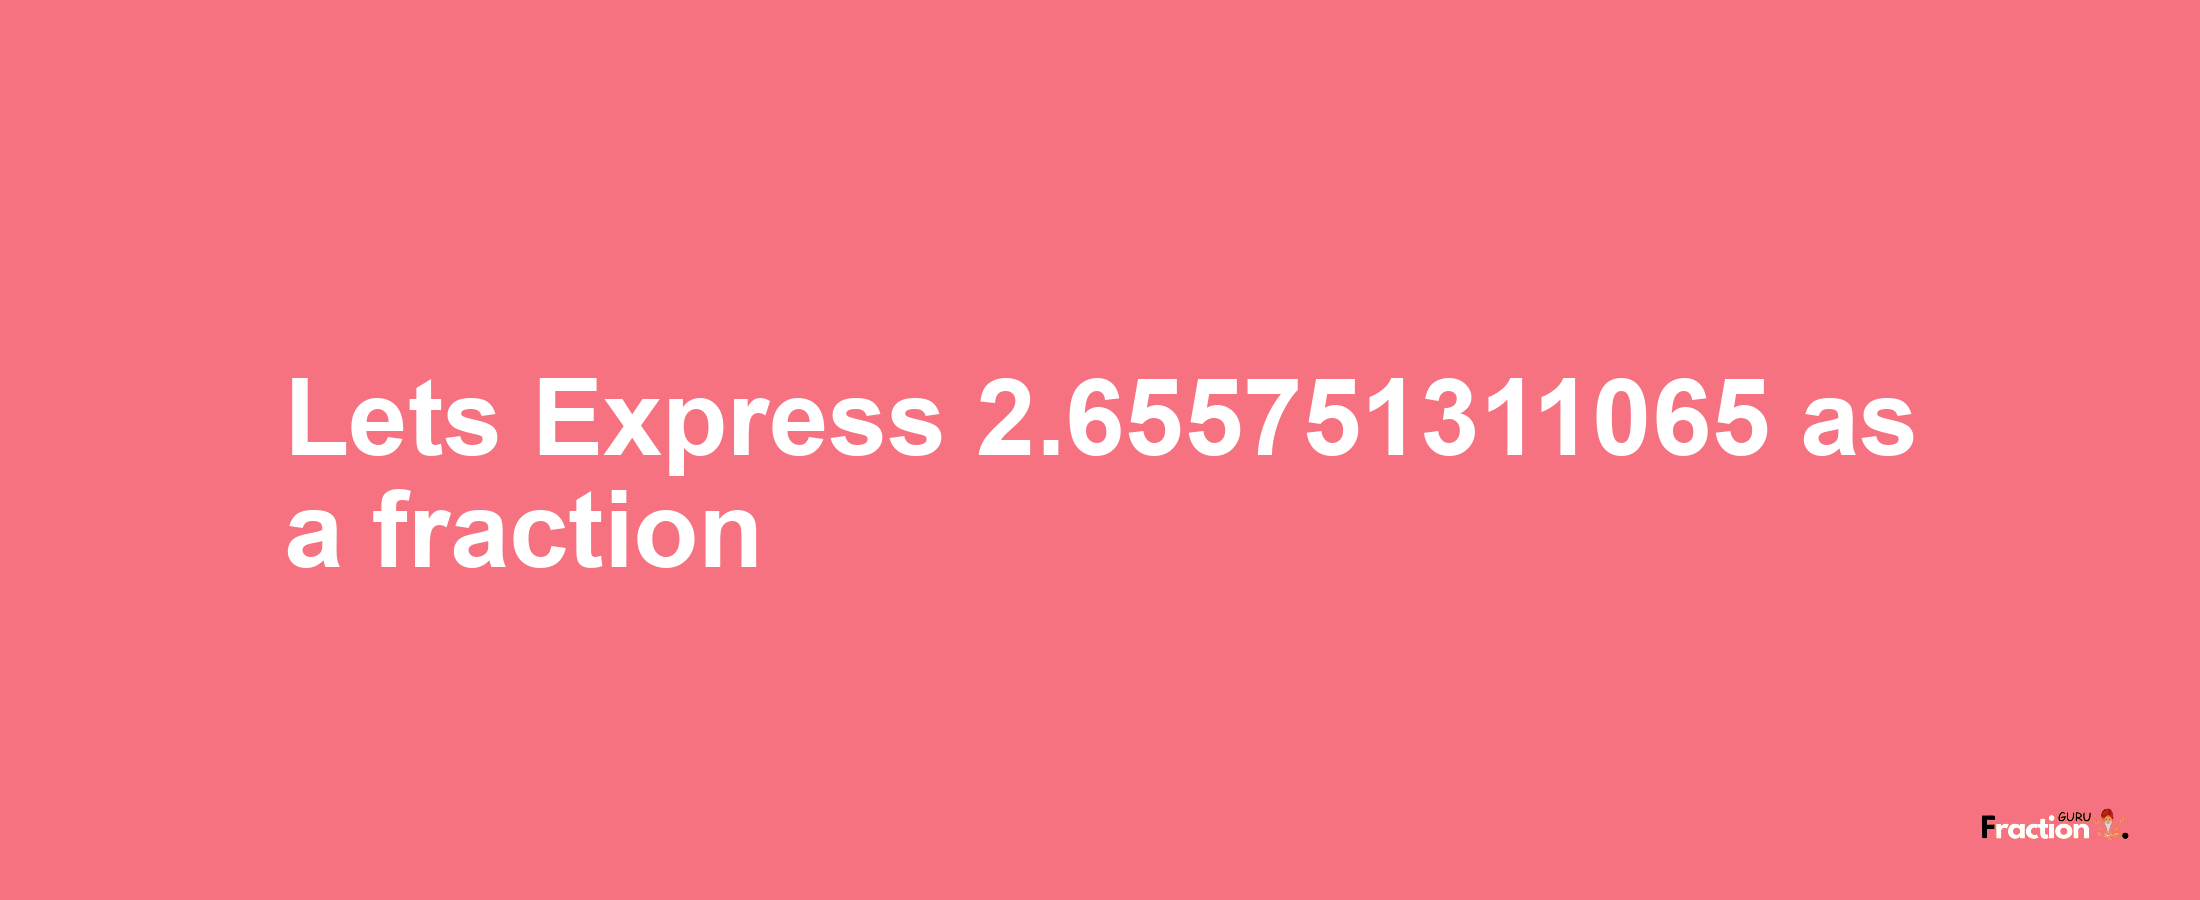 Lets Express 2.655751311065 as afraction